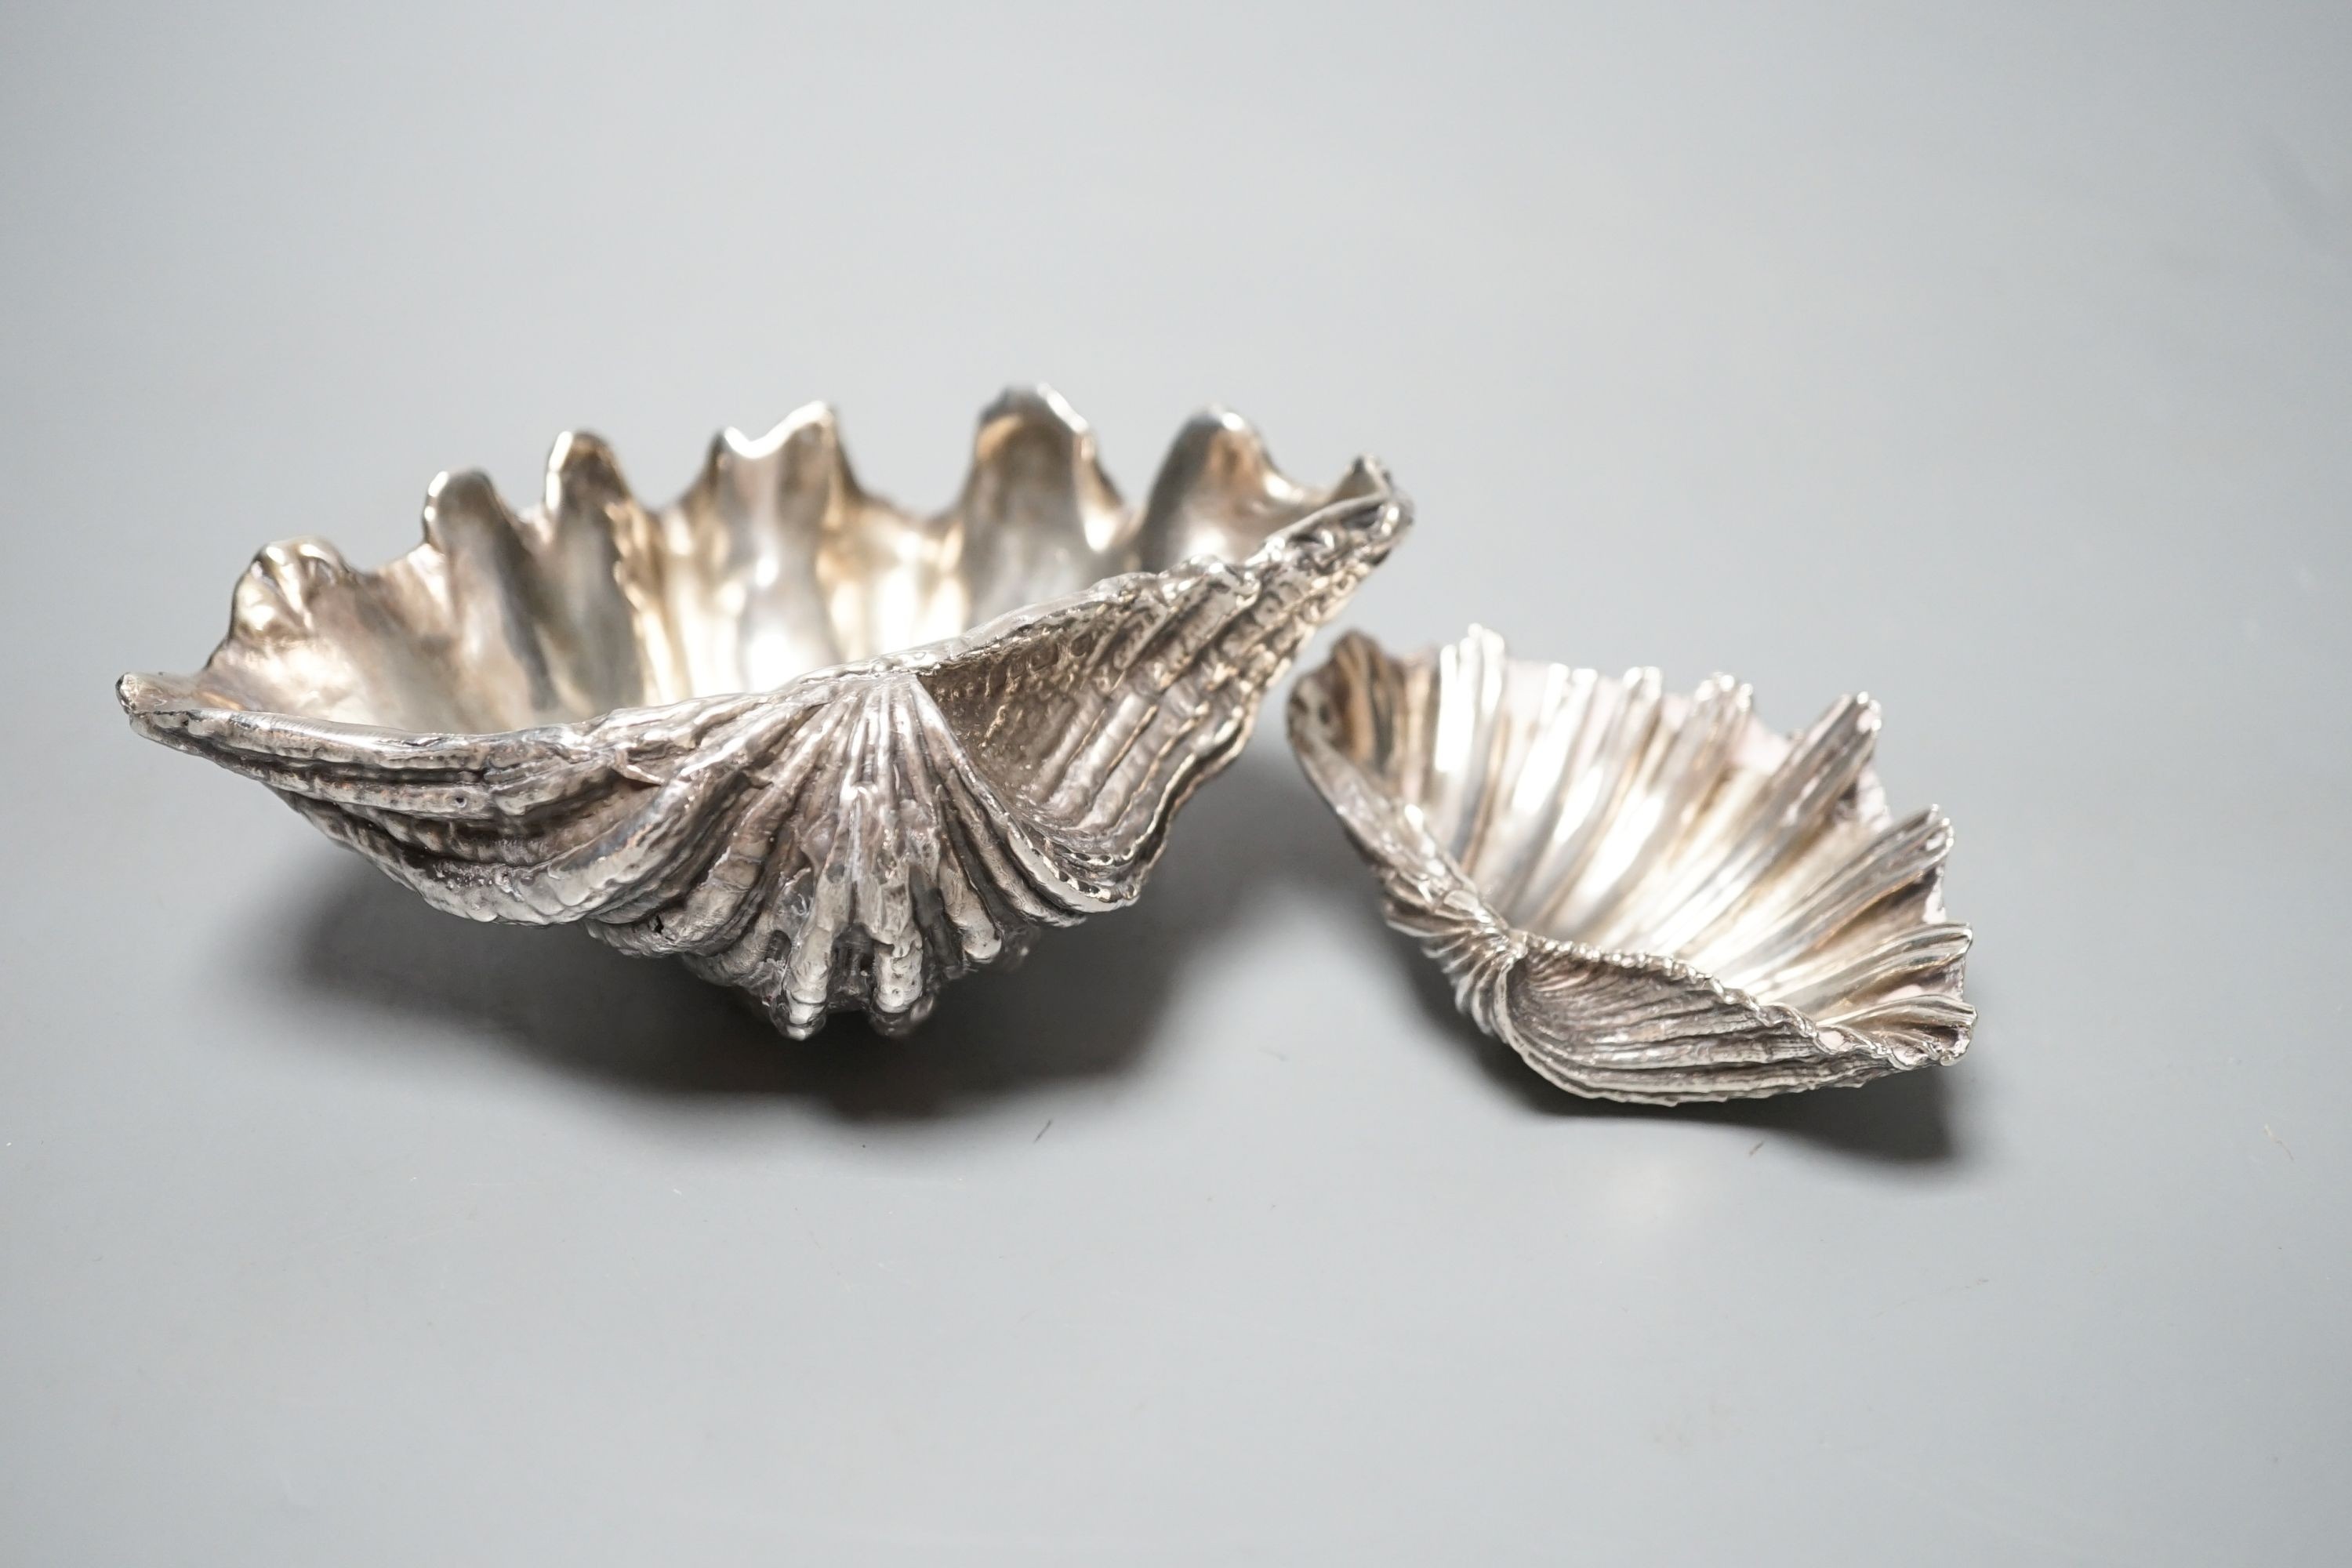 Two modern cast silver shell dishes, Patricia Jean Hamilton, London, 1991, largest 12.9cm, 18.5oz.